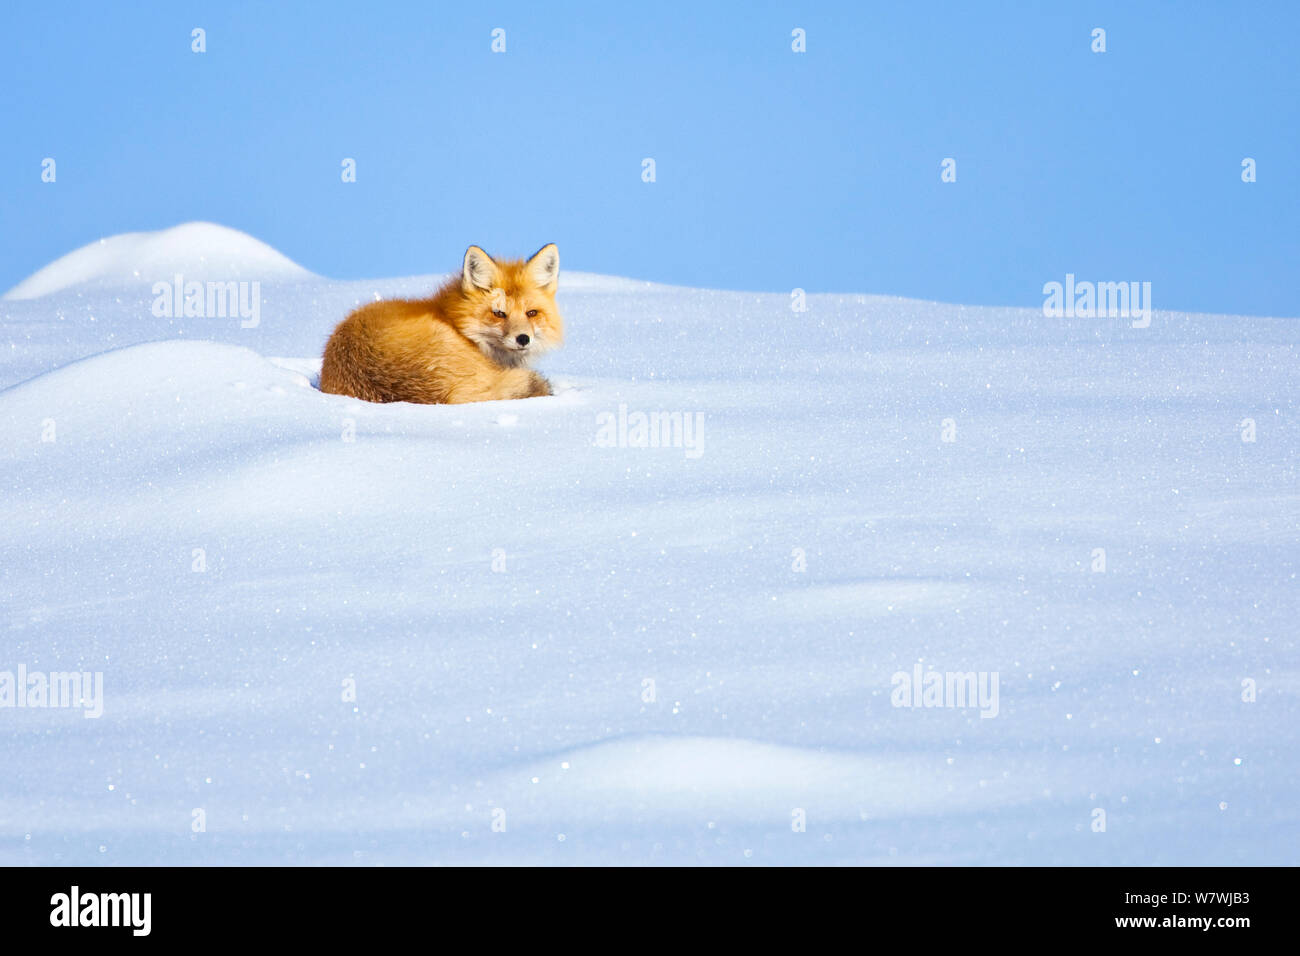 A Red Fox (Vulpes vulpes) waking up from a nap, Lamar Valley, Yellowstone National Park, Wyoming, USA. December. Stock Photo